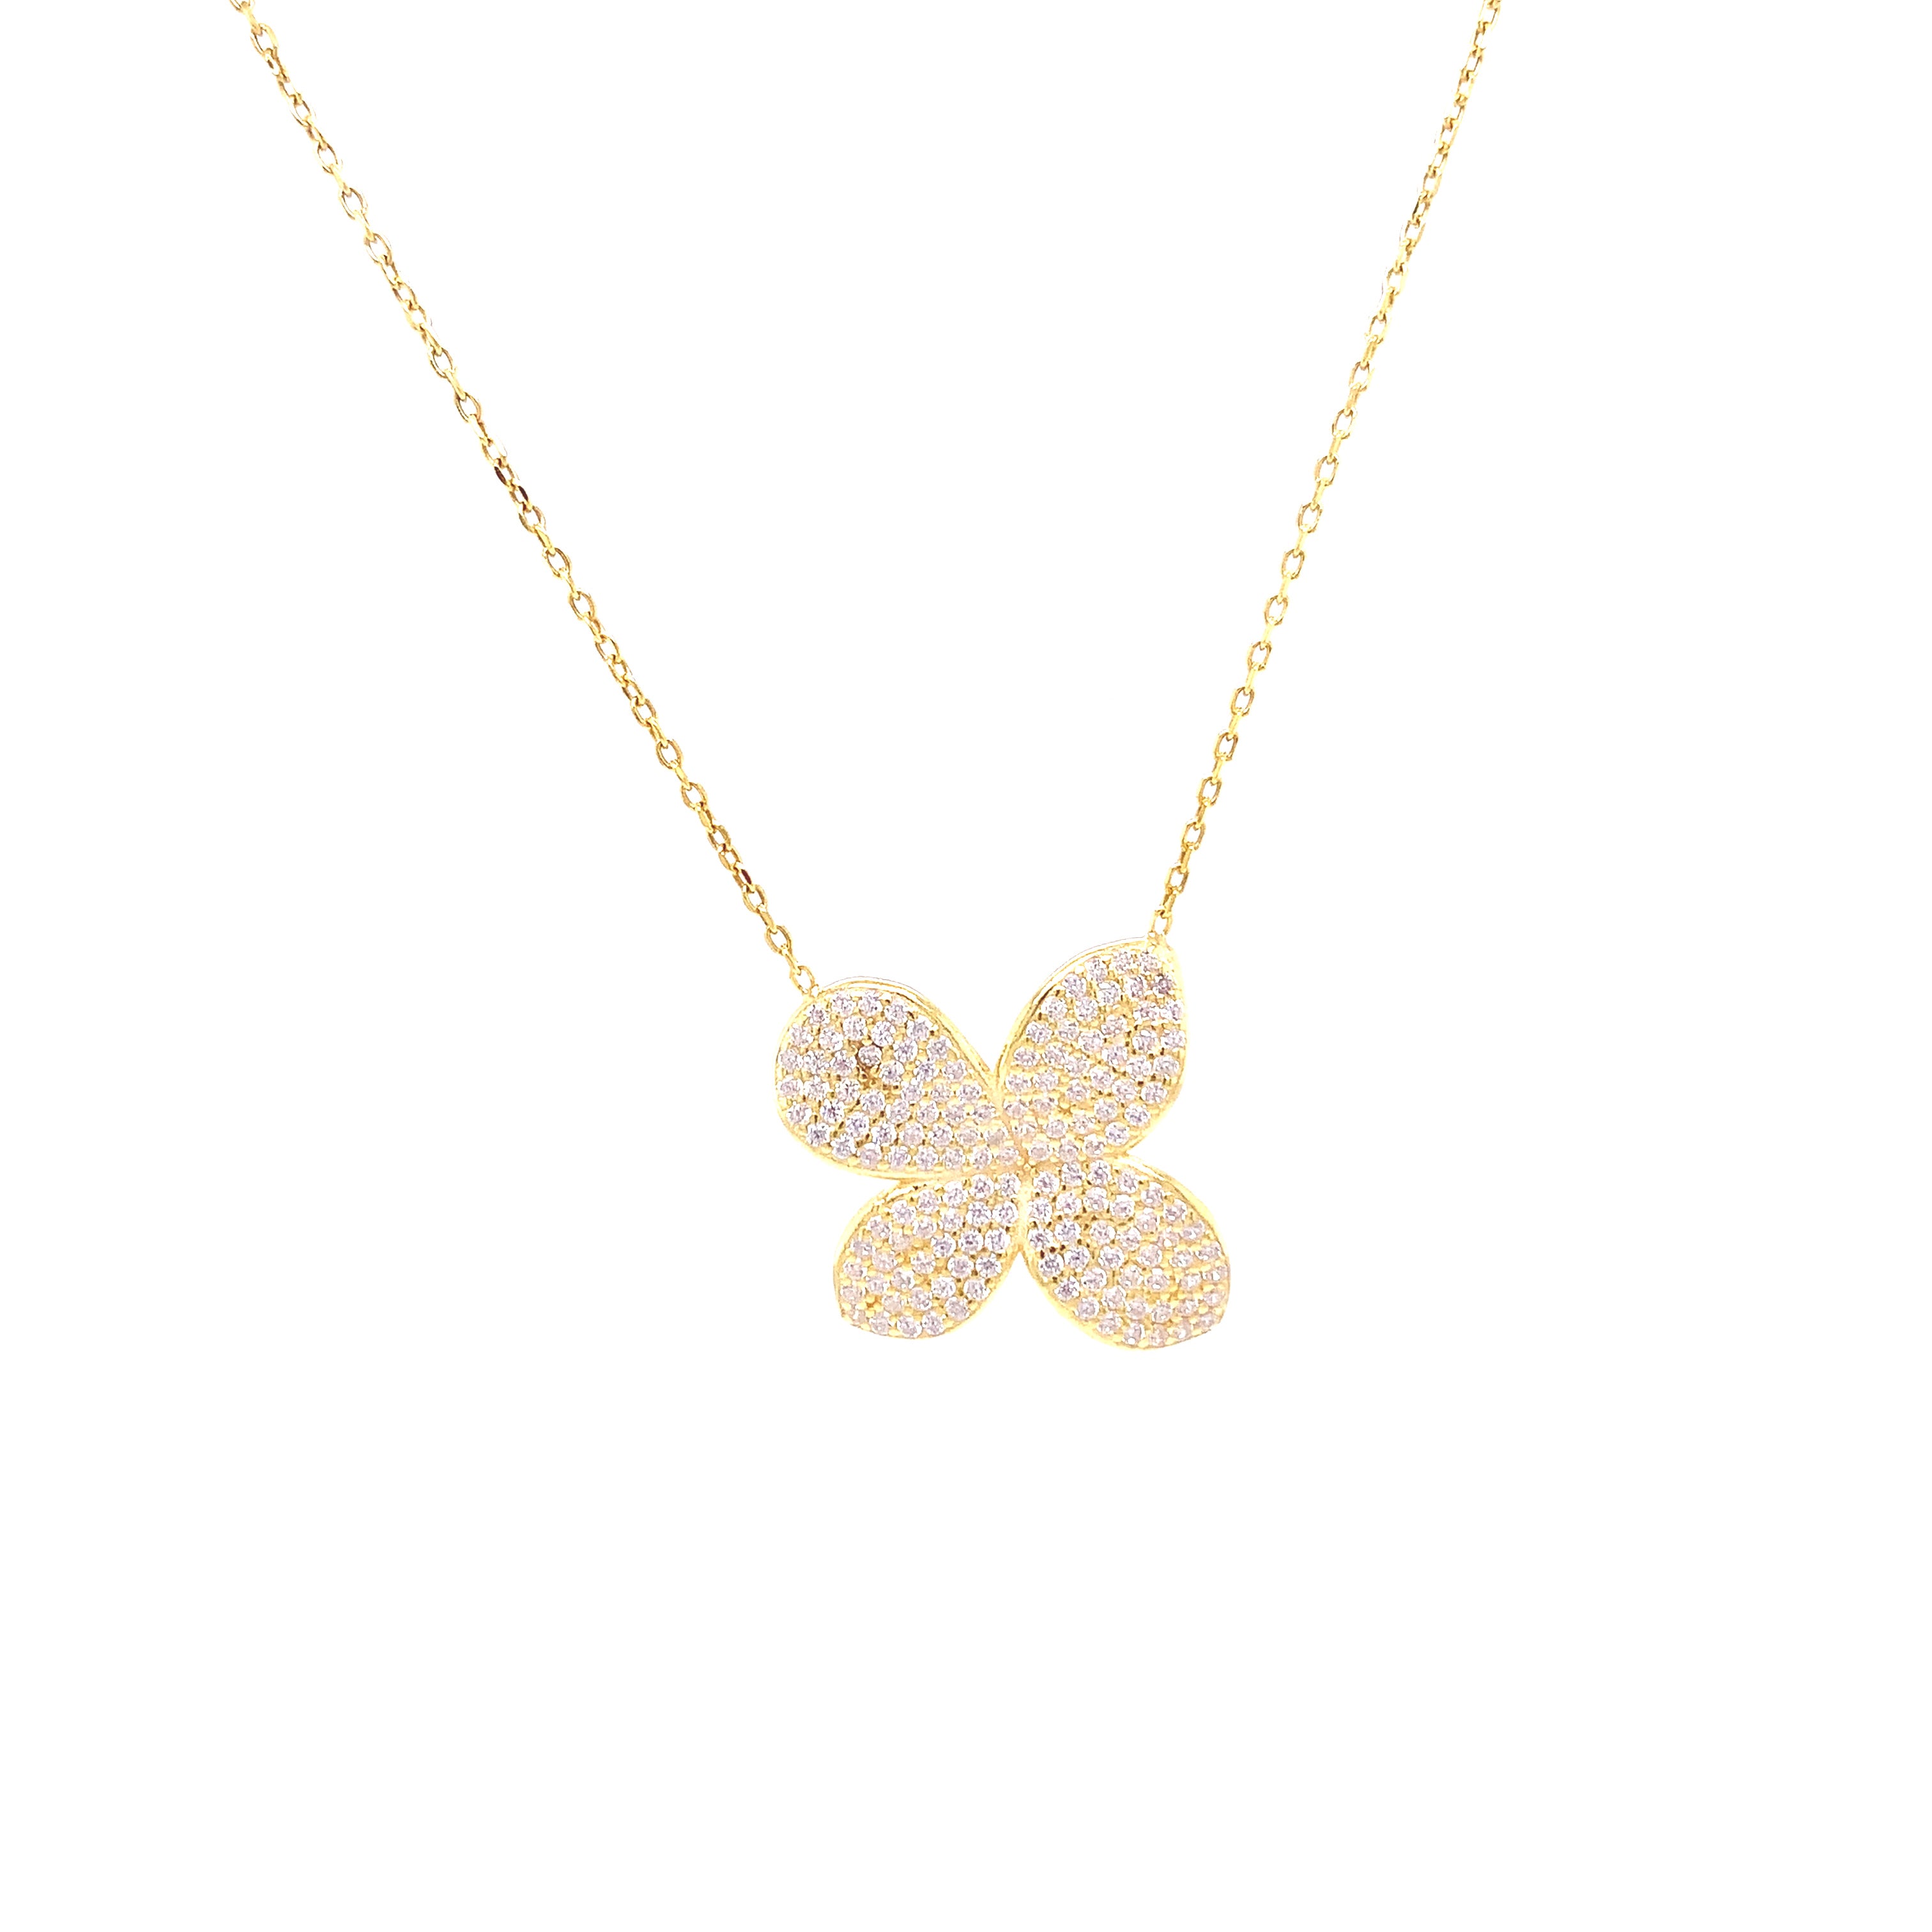 Pave Flower Necklace - It's All A Gift